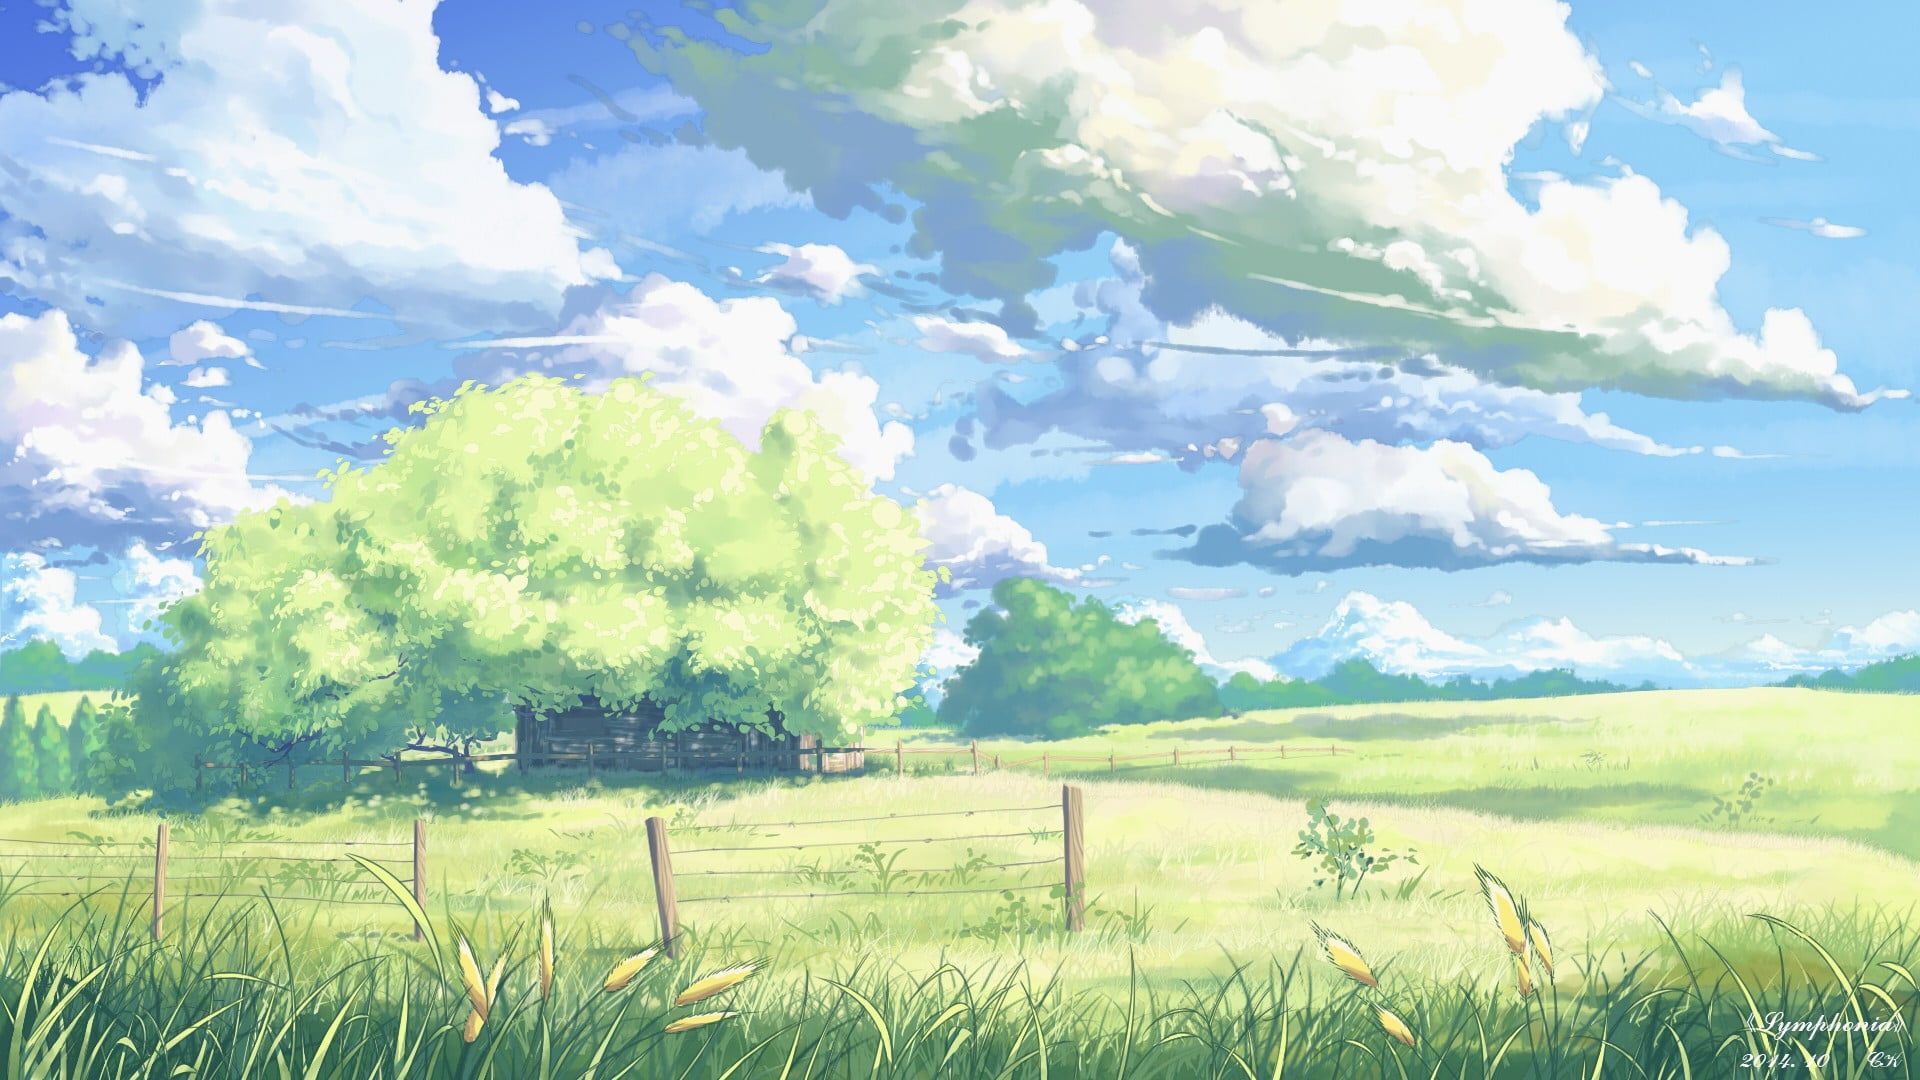 Anime Landscape HD Wallpaper by まんぷくア